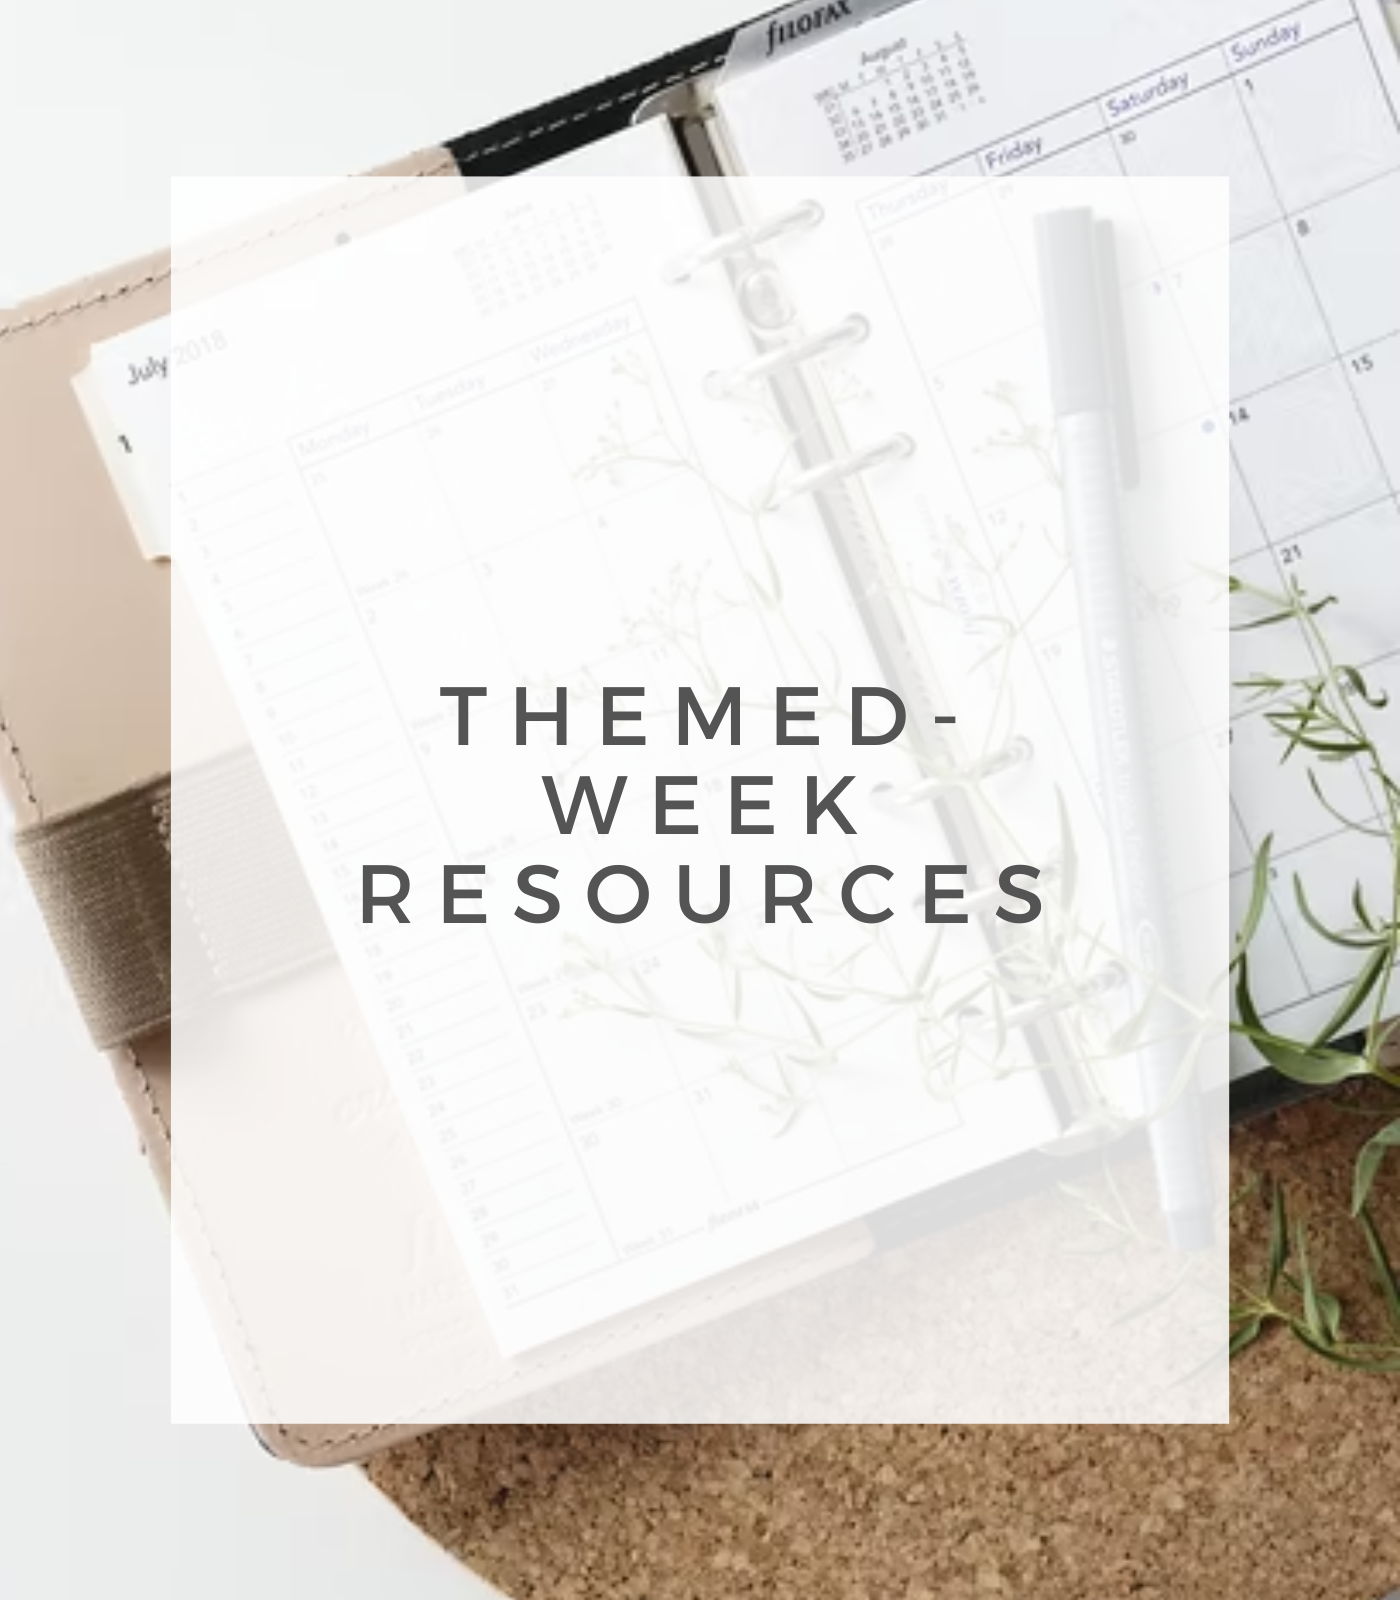 Themed-Week Resources